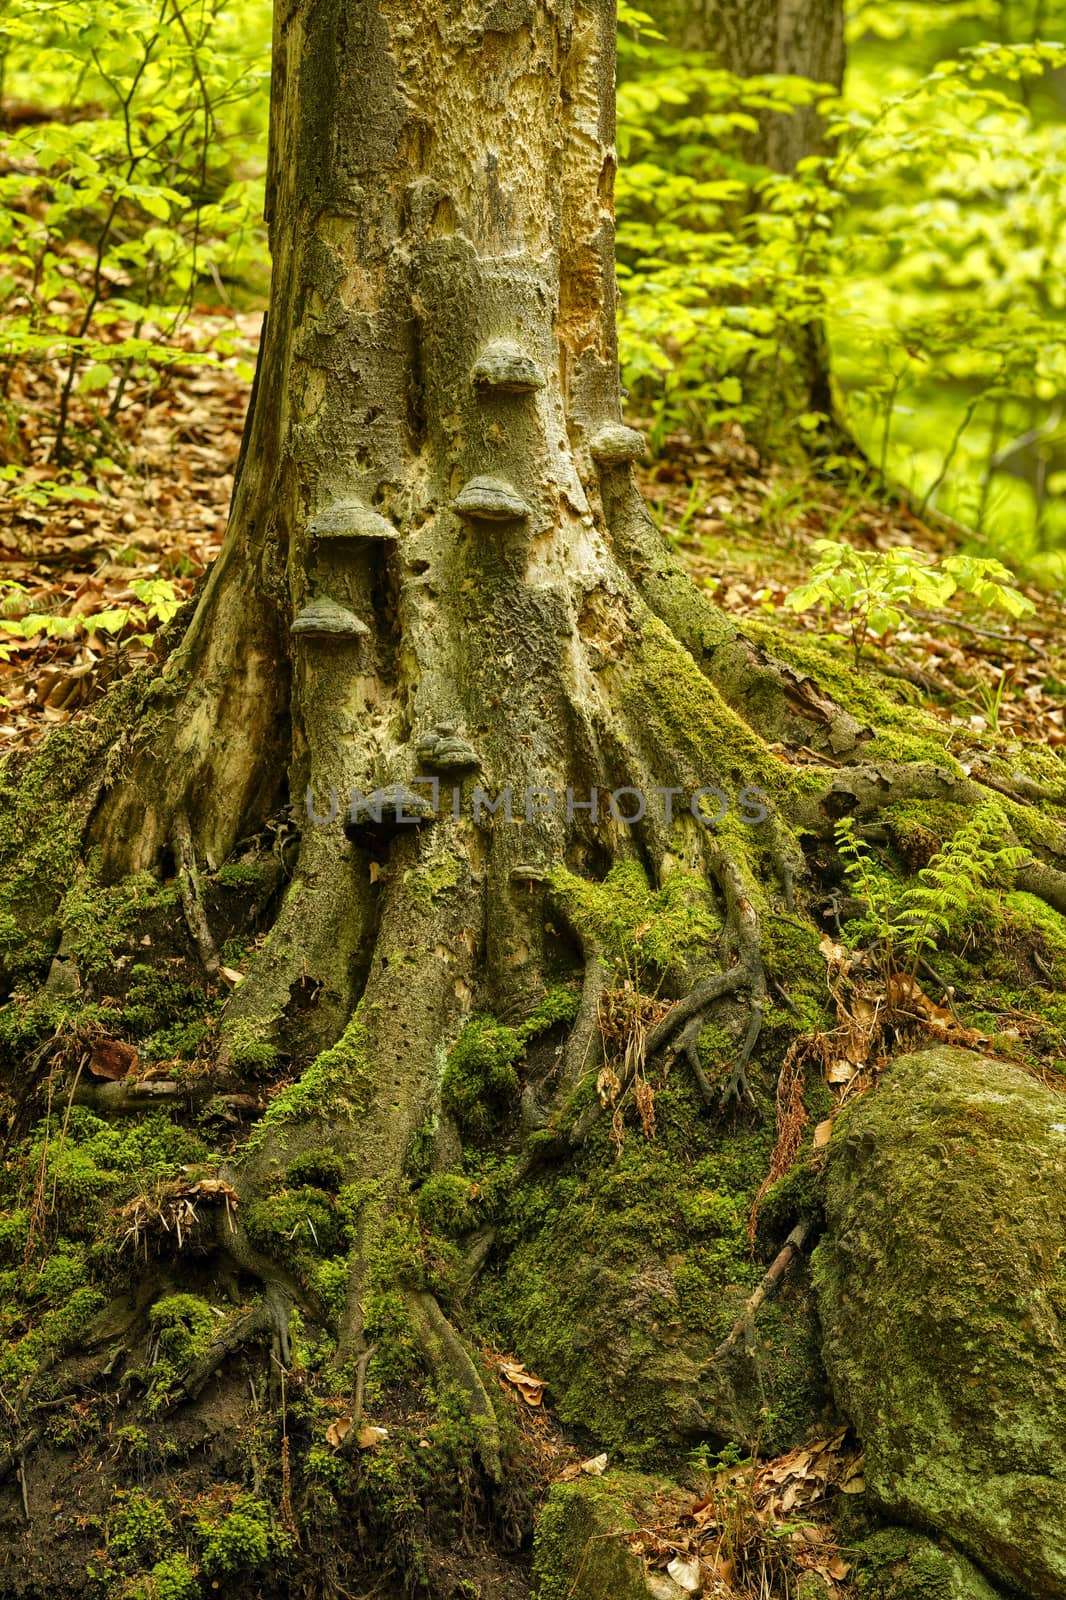 Beautiful old gnarled tree next to Maly waterfall in super green spring forest surroundings, Czech Republic